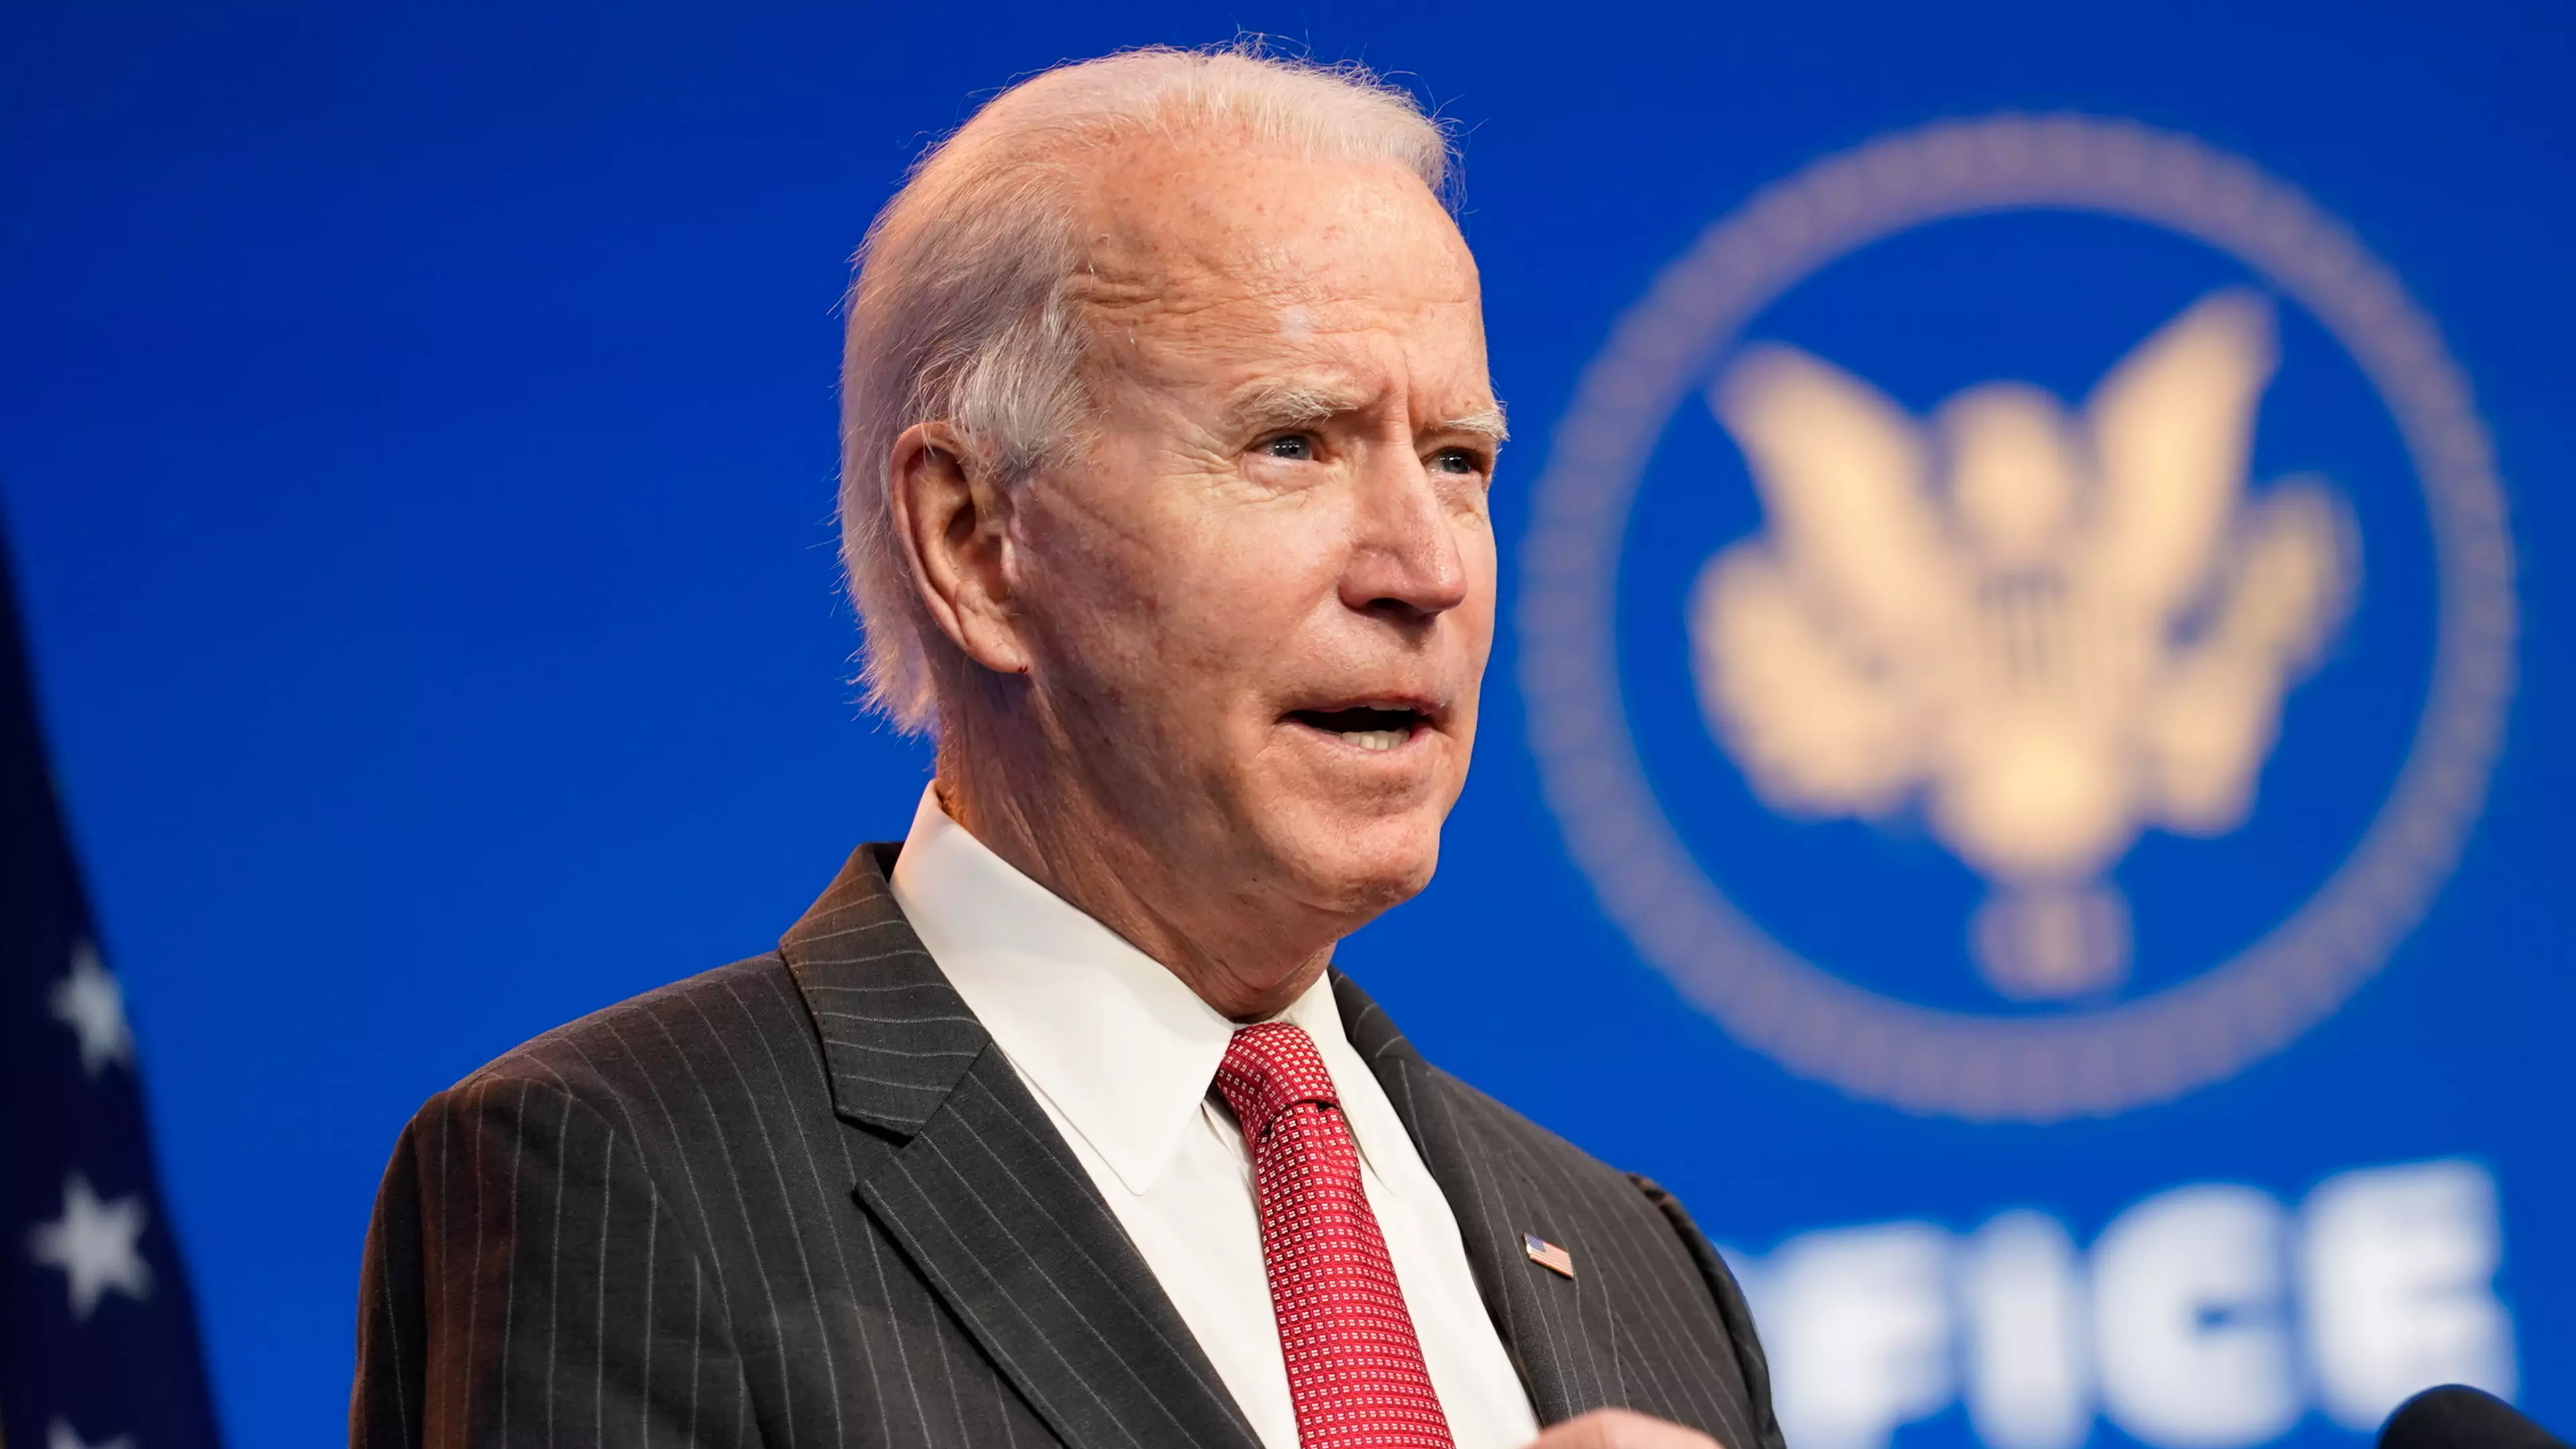 Joe Biden's Administration Has Been Officially Allowed To Start Transition Period